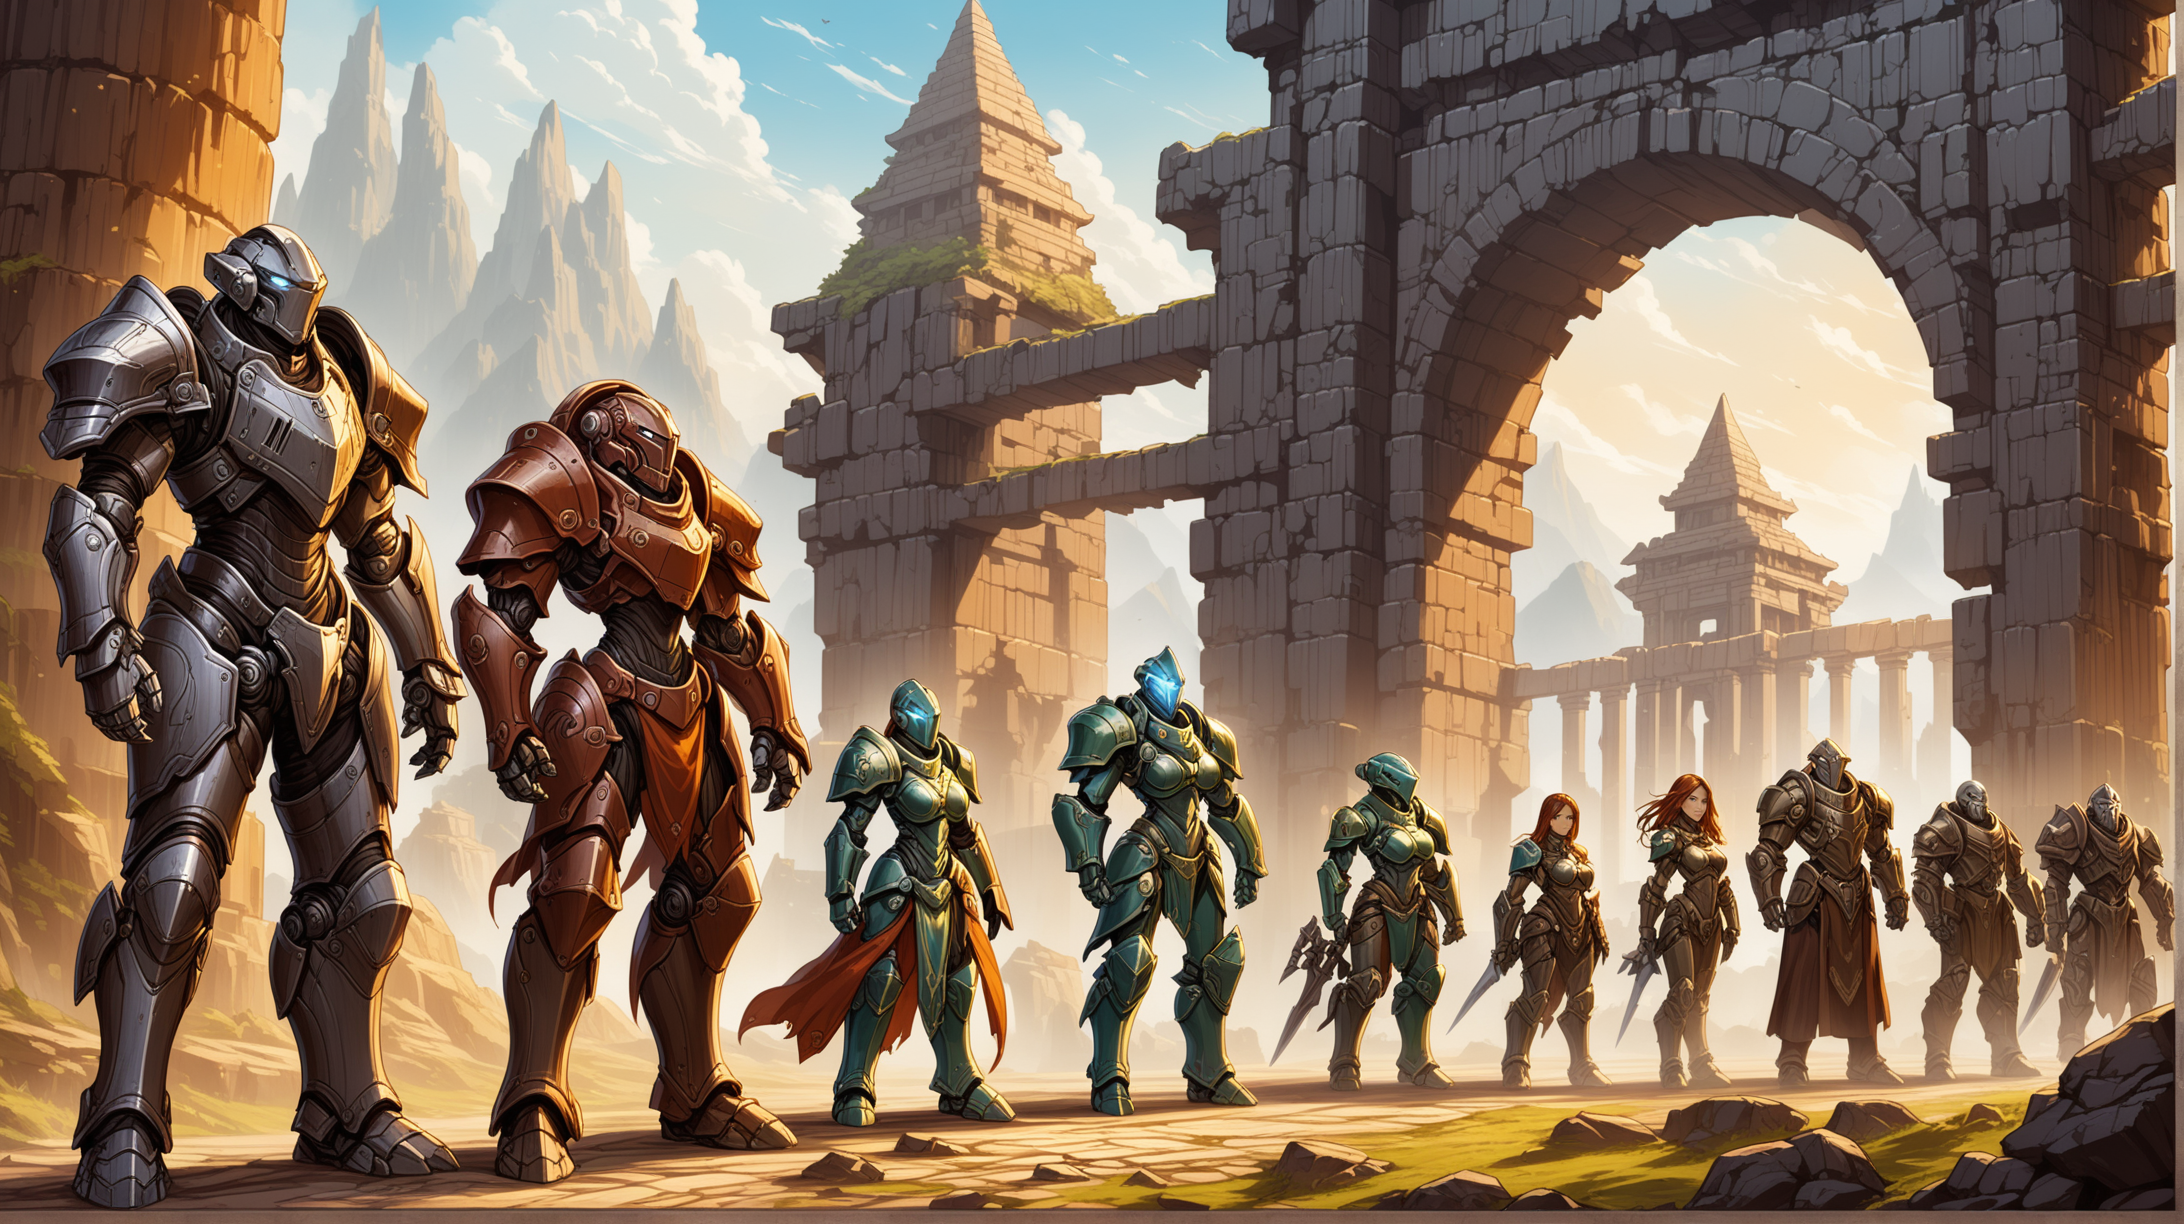 line-up of android construct adventurers, warforged warriors, Eberron, male and female constructs, ancient temple ruins, Medieval fantasy